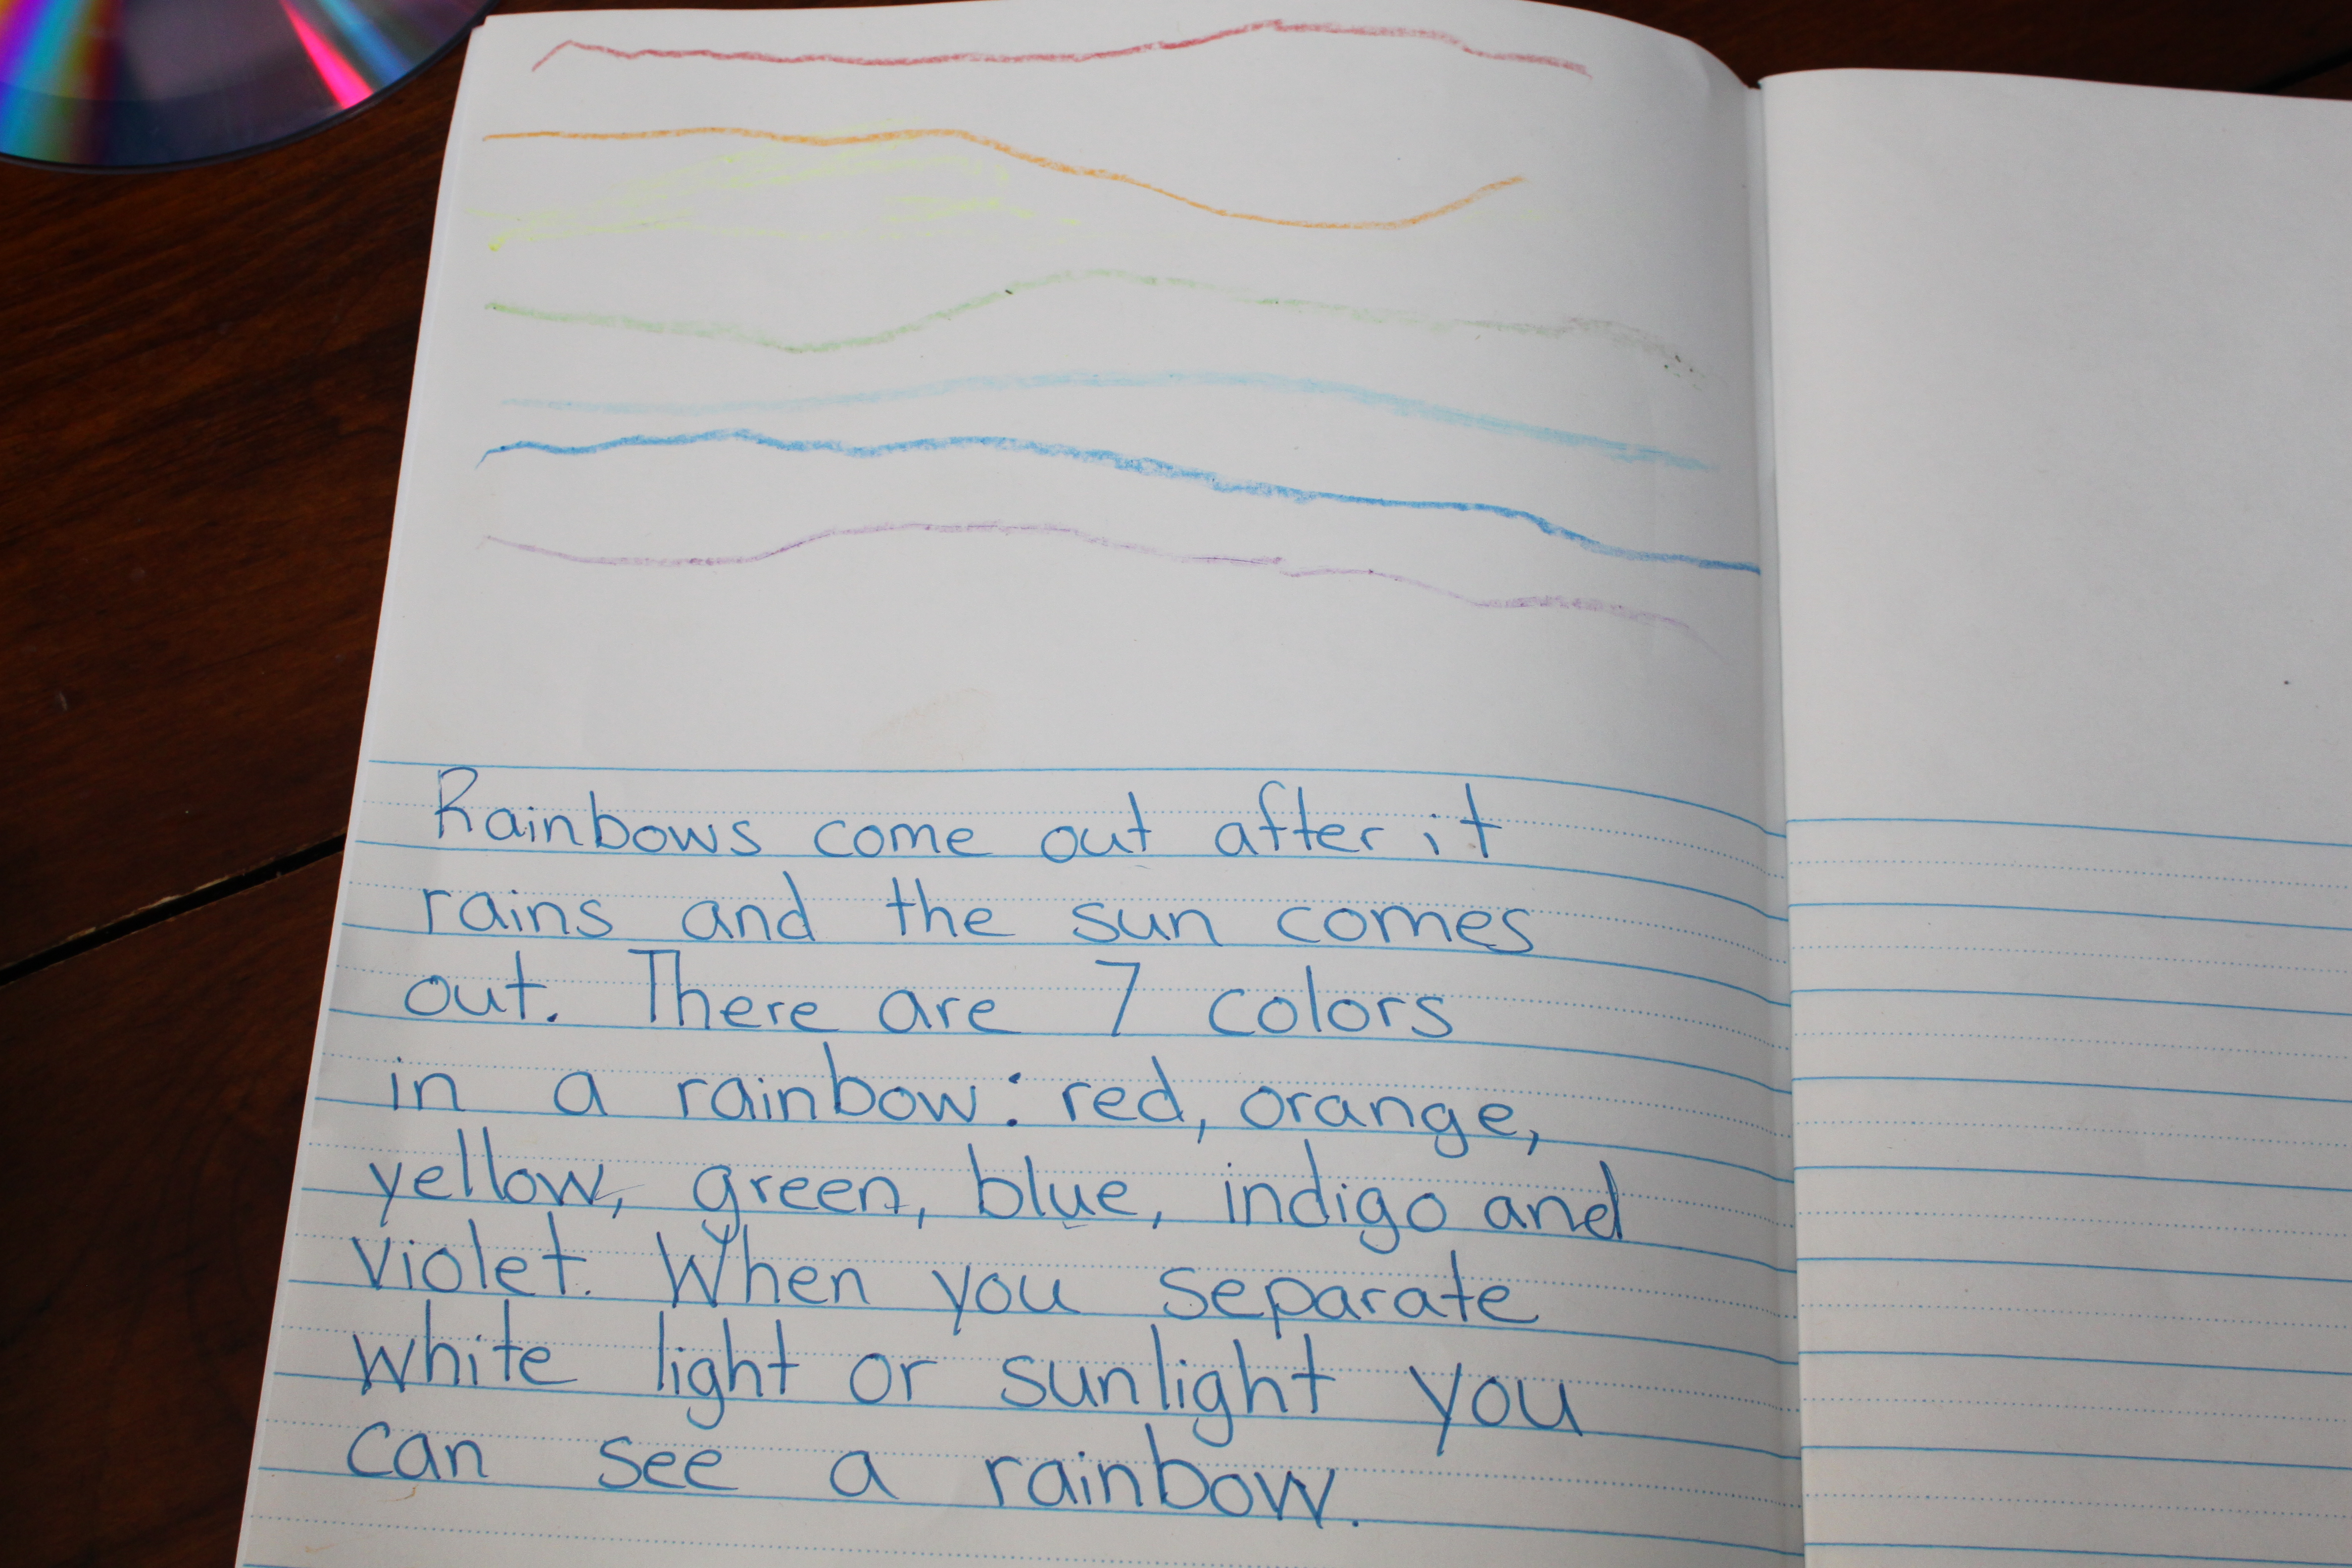 Making Rainbows with Indigo and Violet